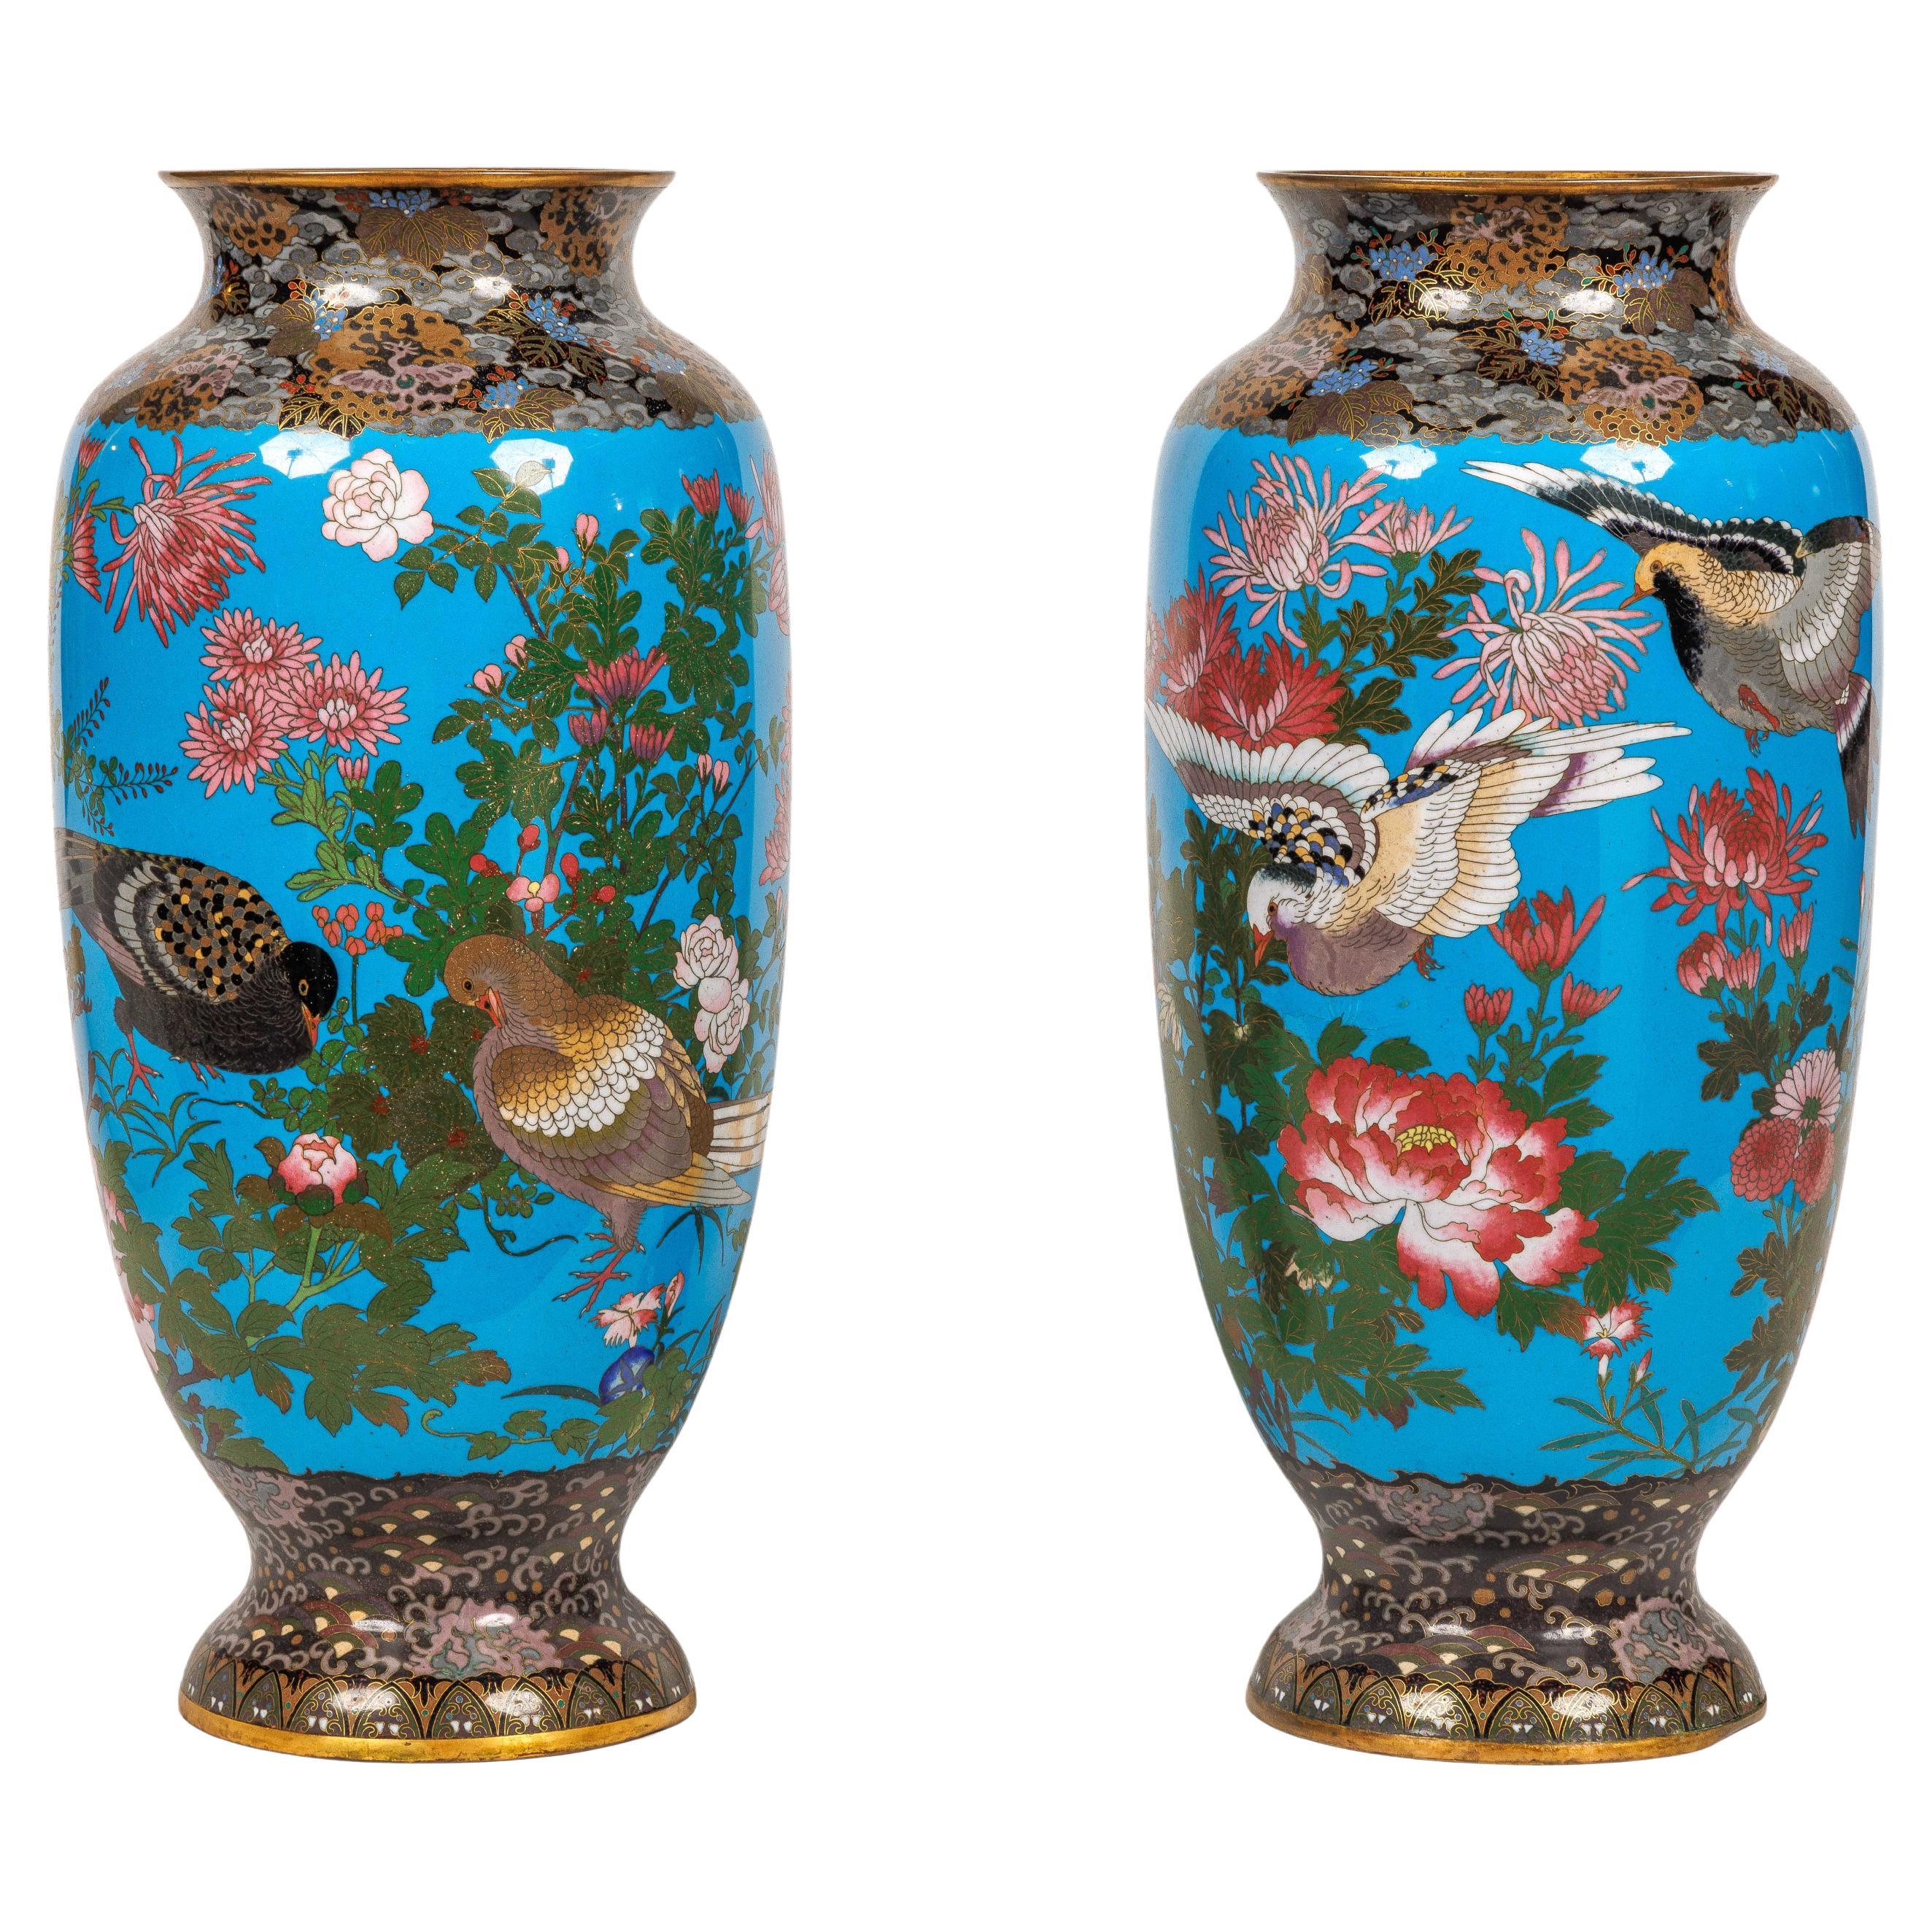 Large Pair of Meiji Period Japanese Cloisonne Enamel Vases Attributed to Goto For Sale